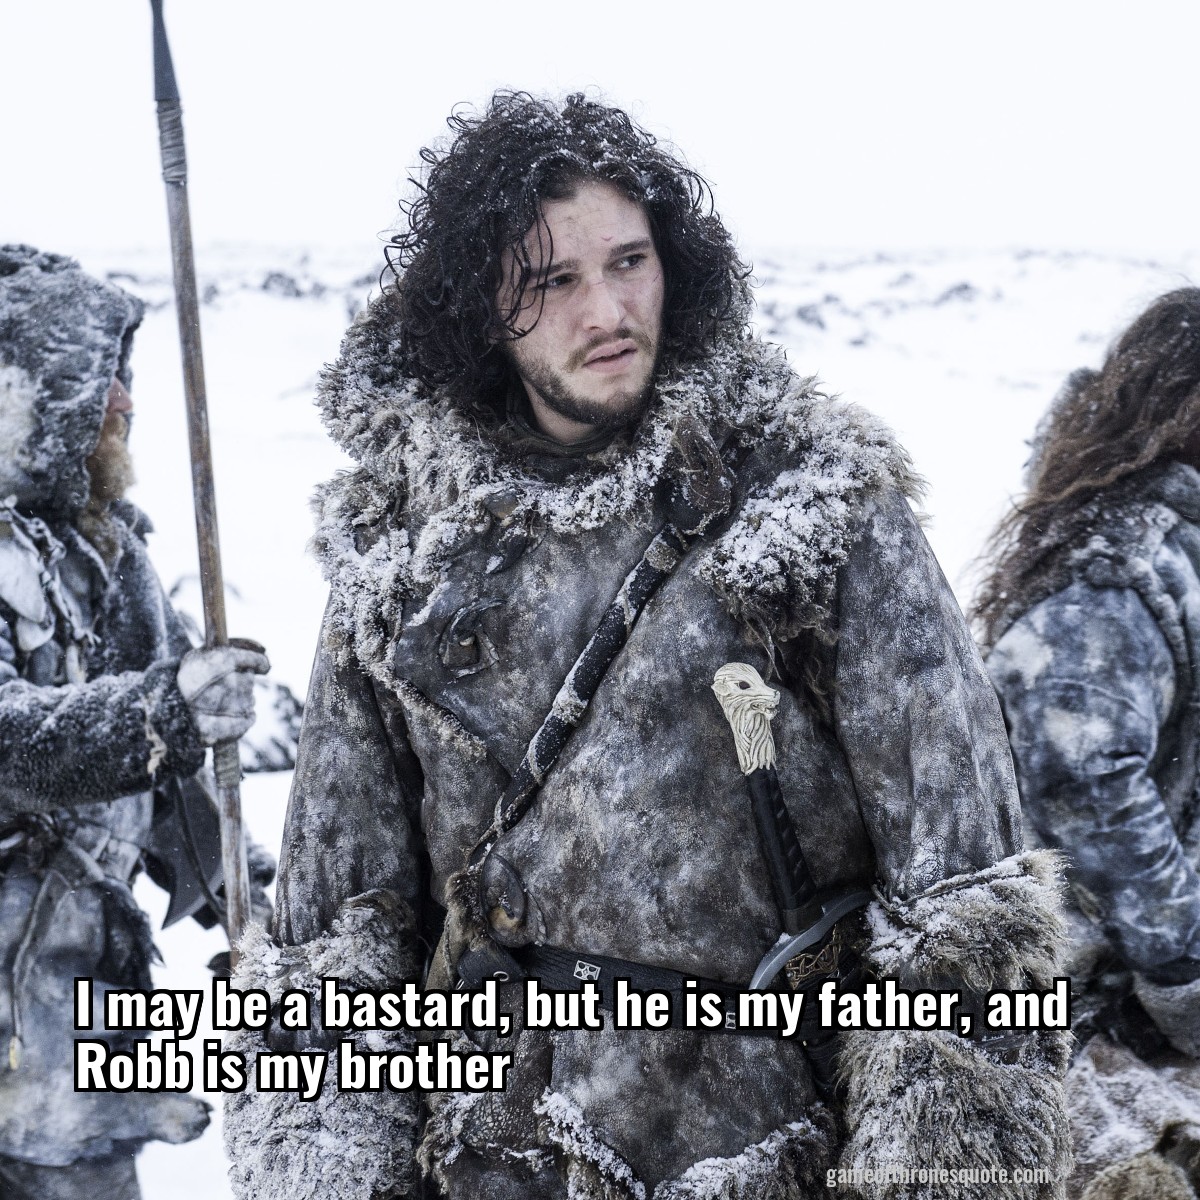 I may be a bastard, but he is my father, and Robb is my brother